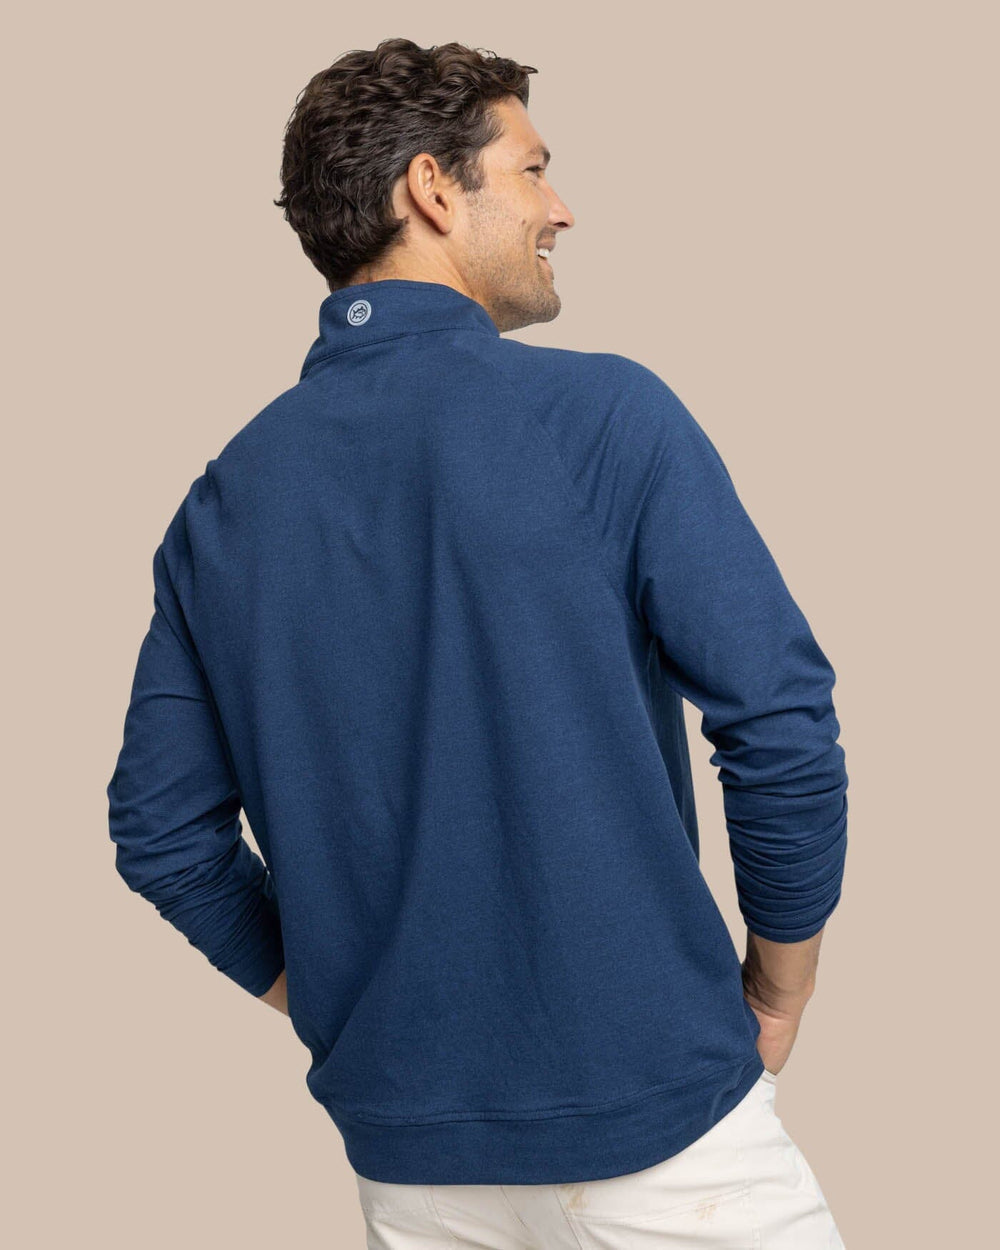 The back view of the Southern Tide Cruiser Heather Quarter Zip Pullover by Southern Tide - Heather Dress Blue